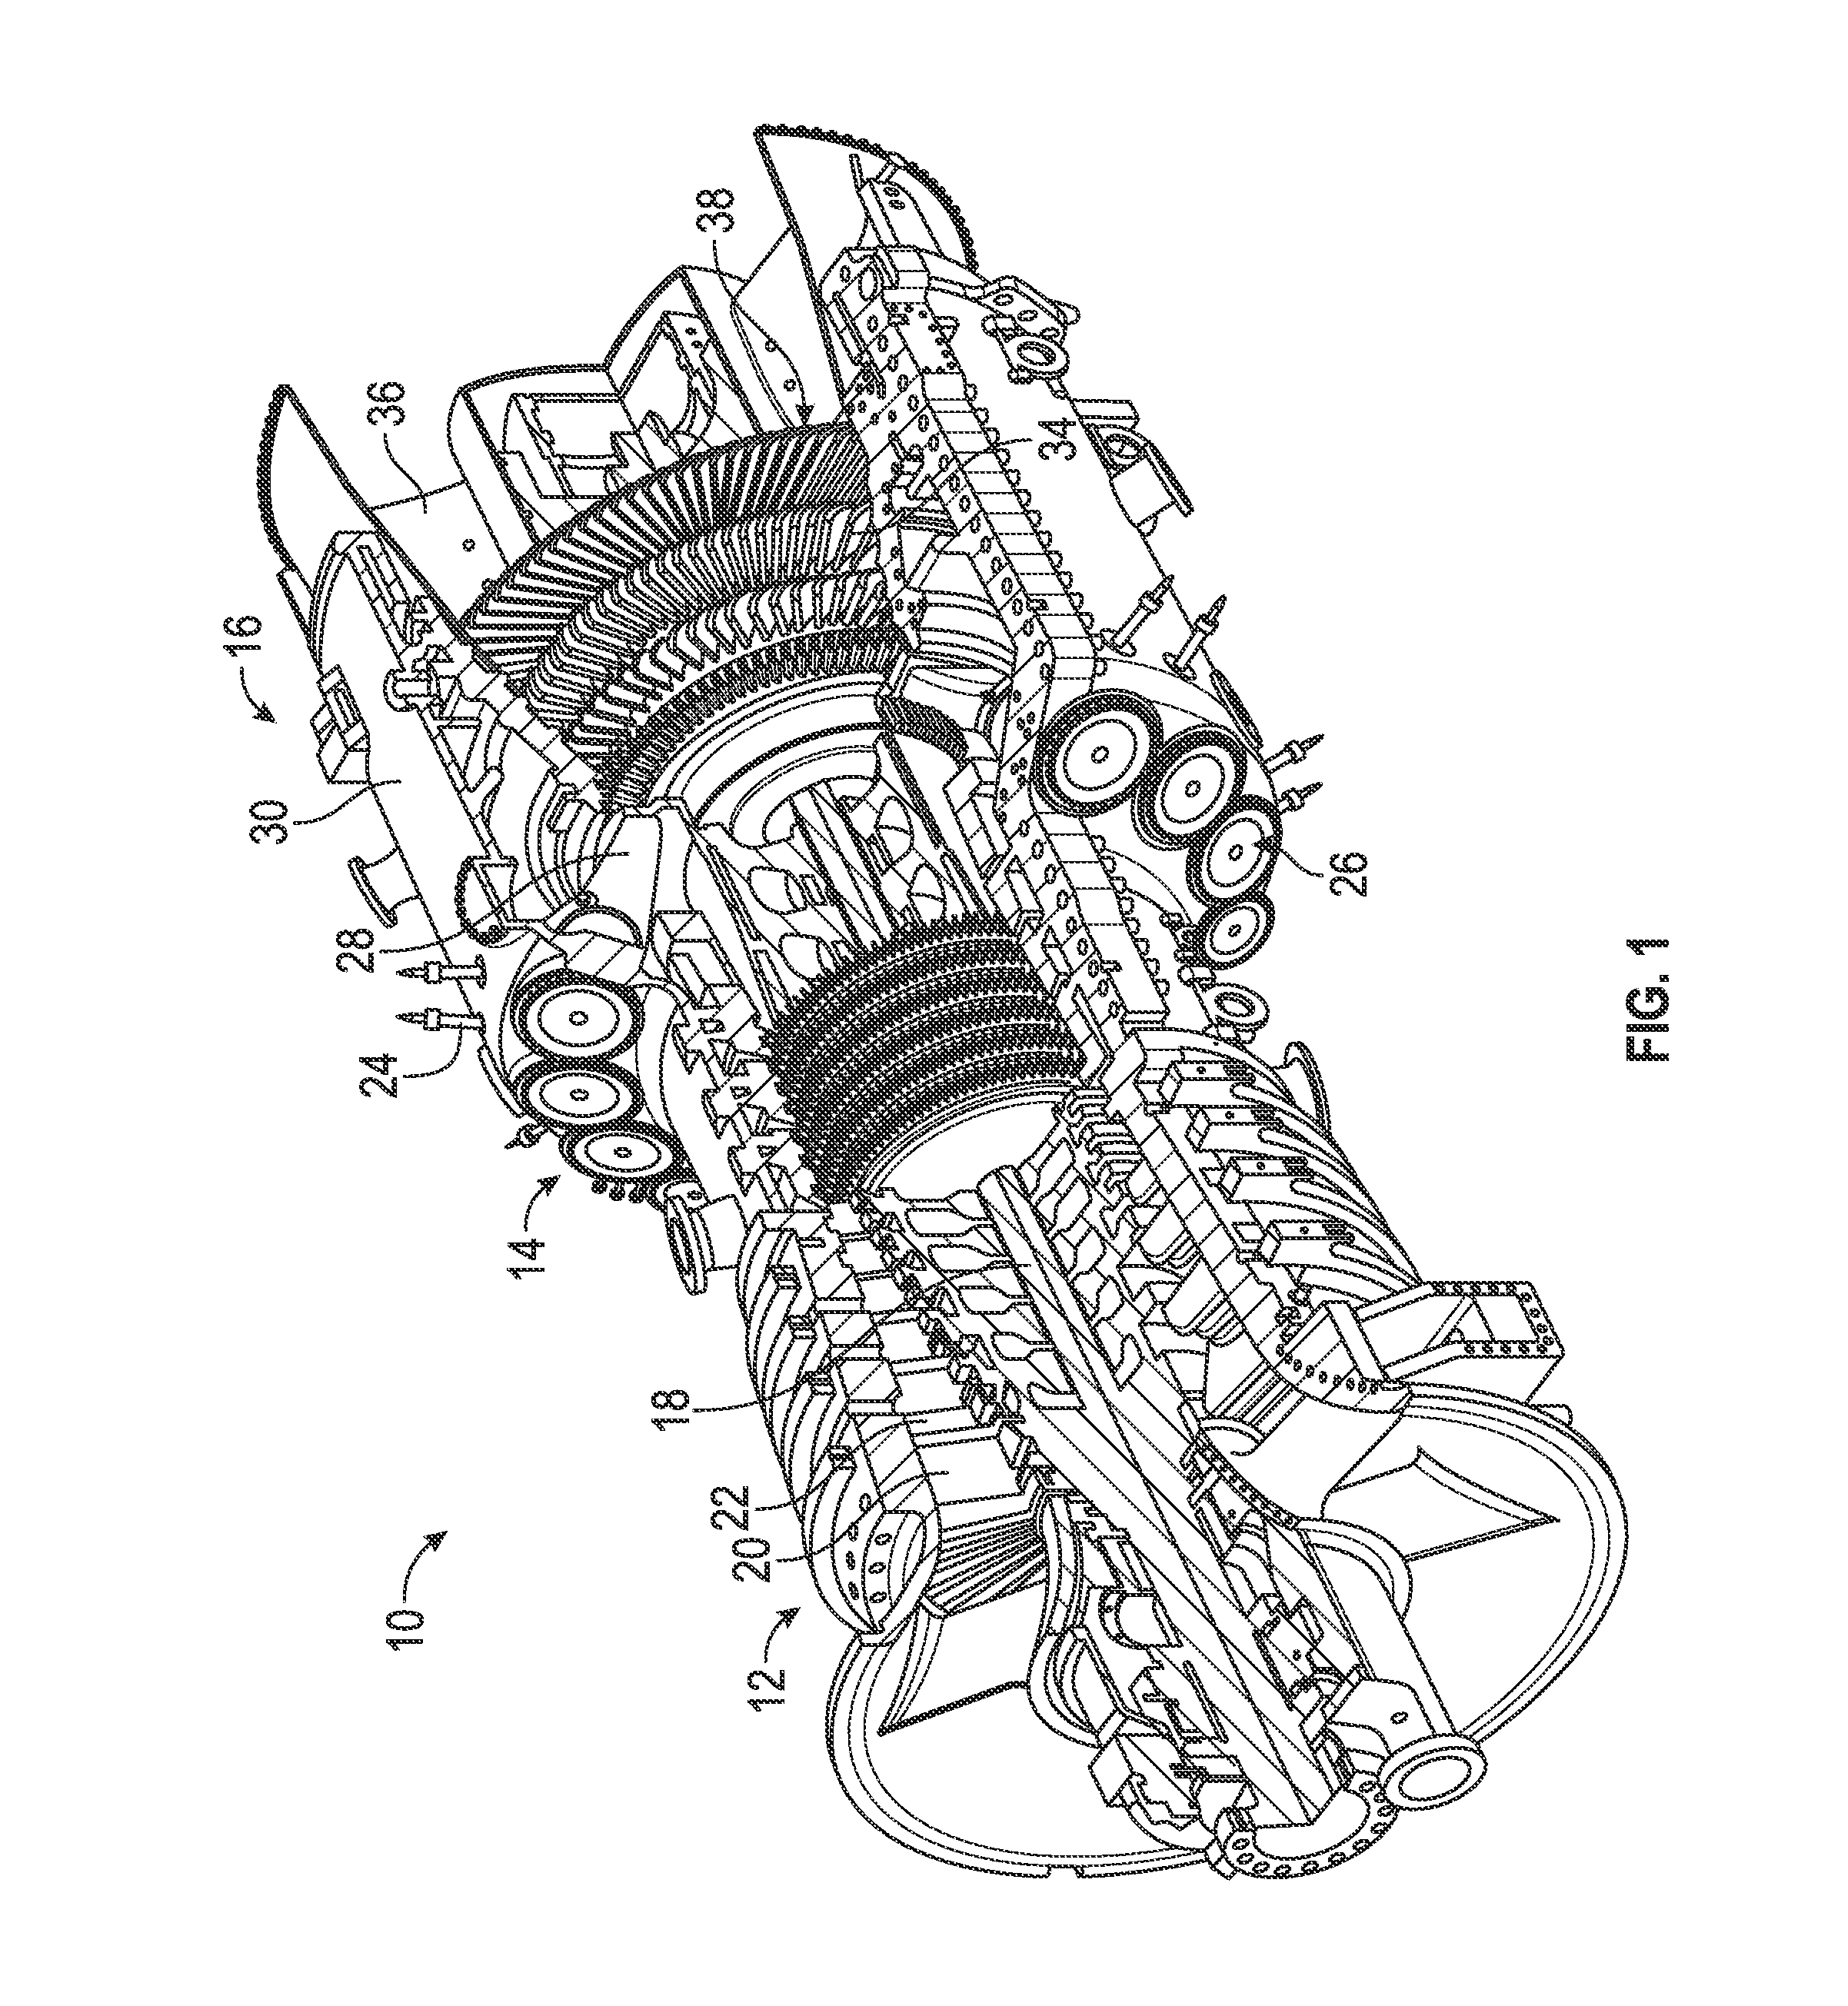 Hardware and method for implementation of in situ acoustic thermograph inspections